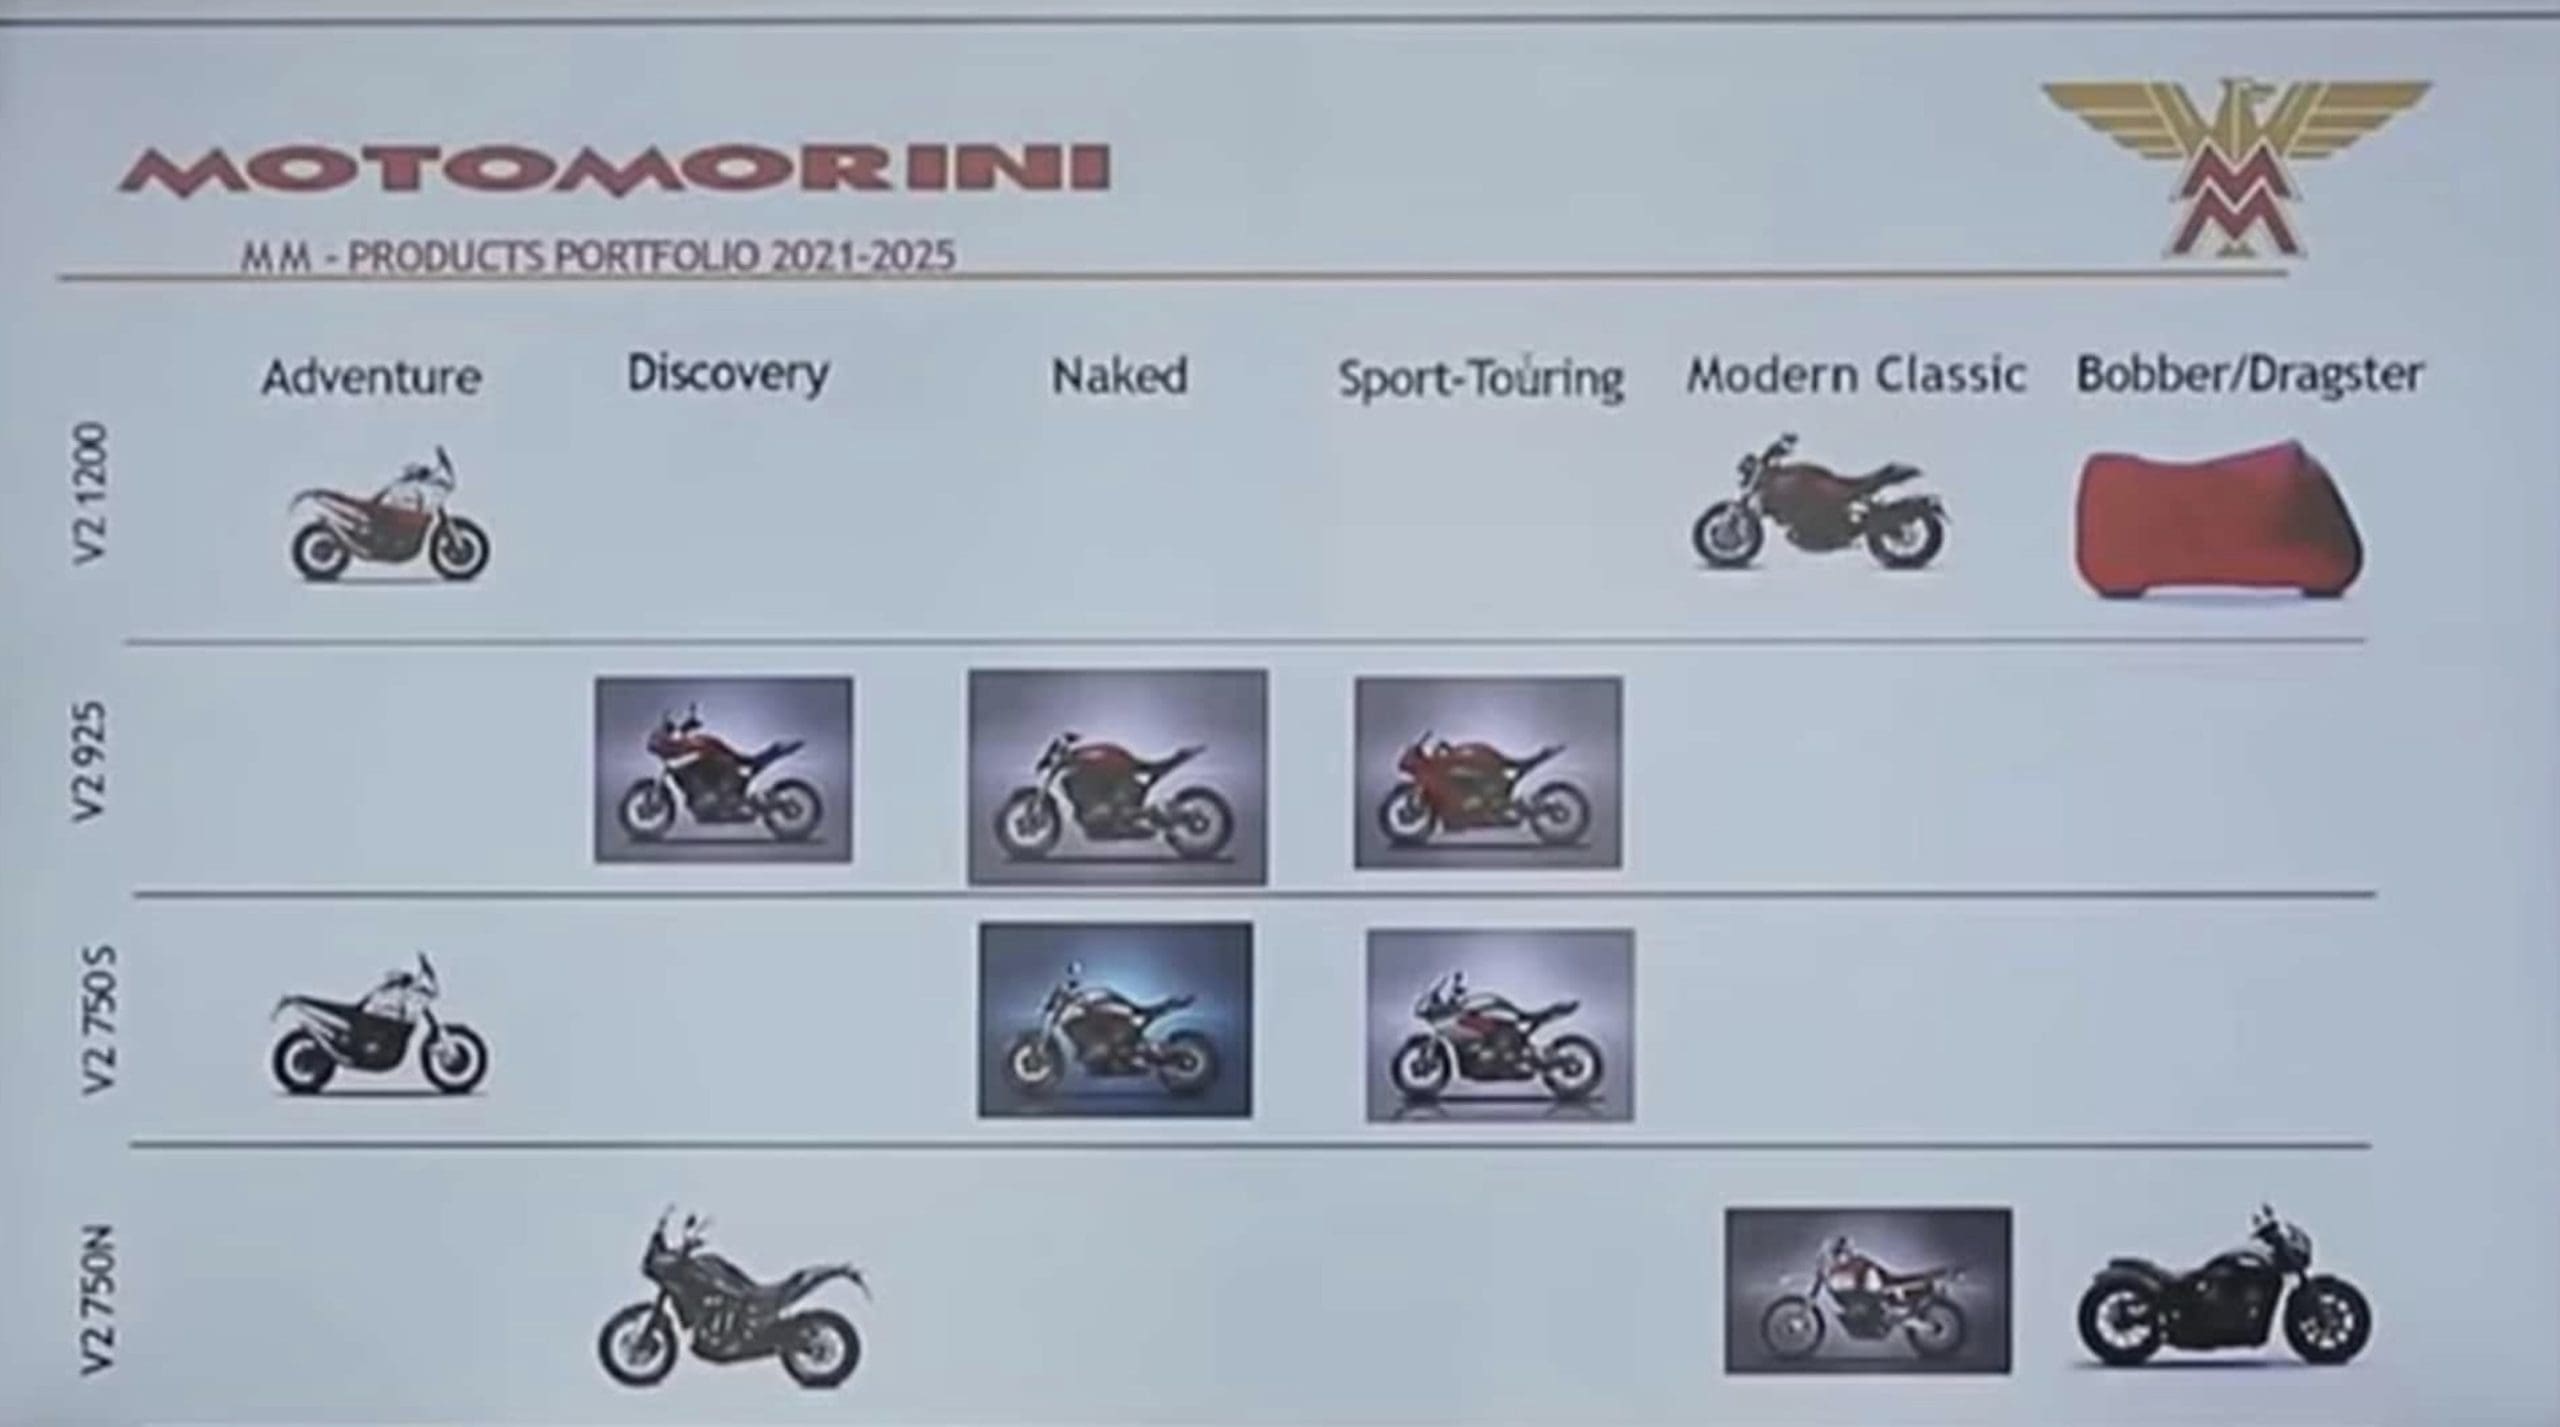 The leaked slide that was purportedly shown in an interview with Motorrad provides great excitement, though little actual detail on what's being debuted, and when. Media sourced from RideApart. 